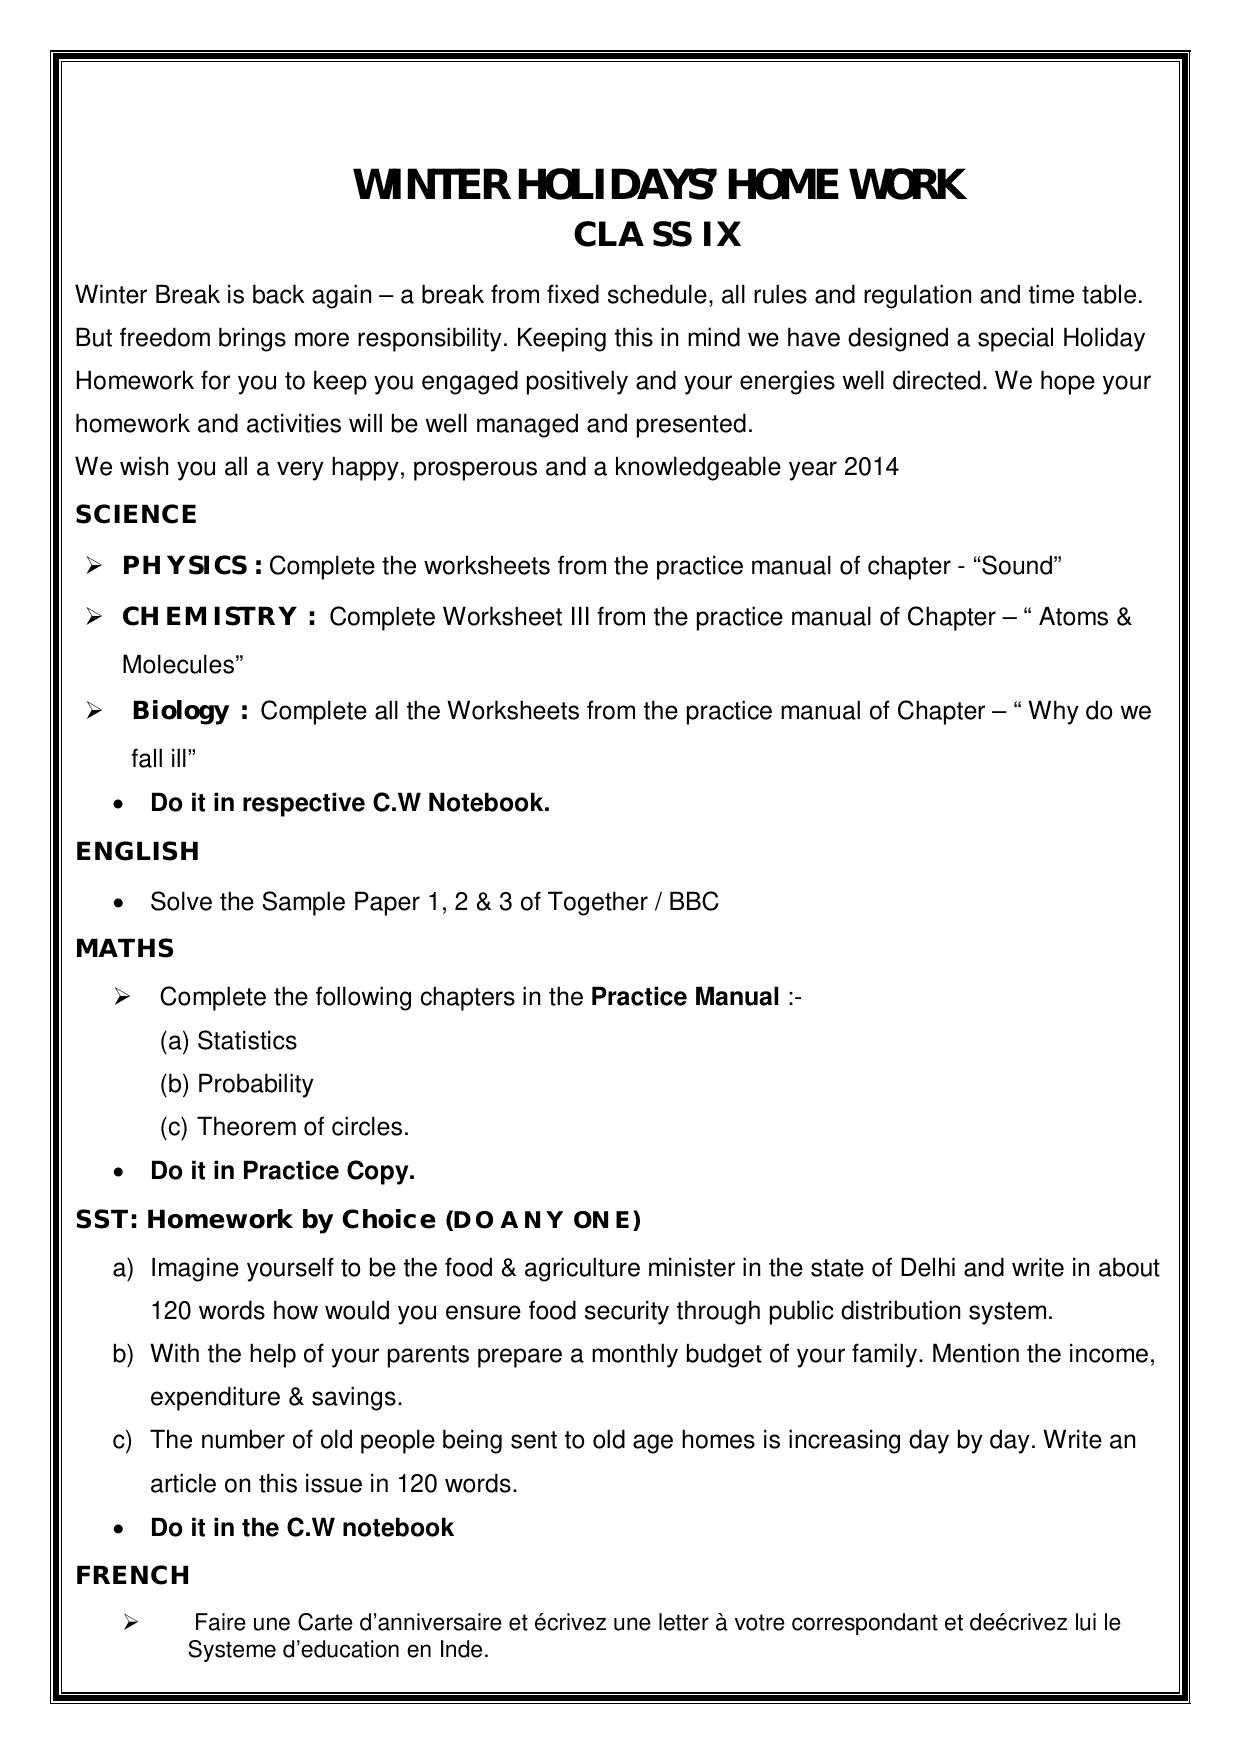 CBSE Worksheets for Class 9 Assignment 1 - Page 1